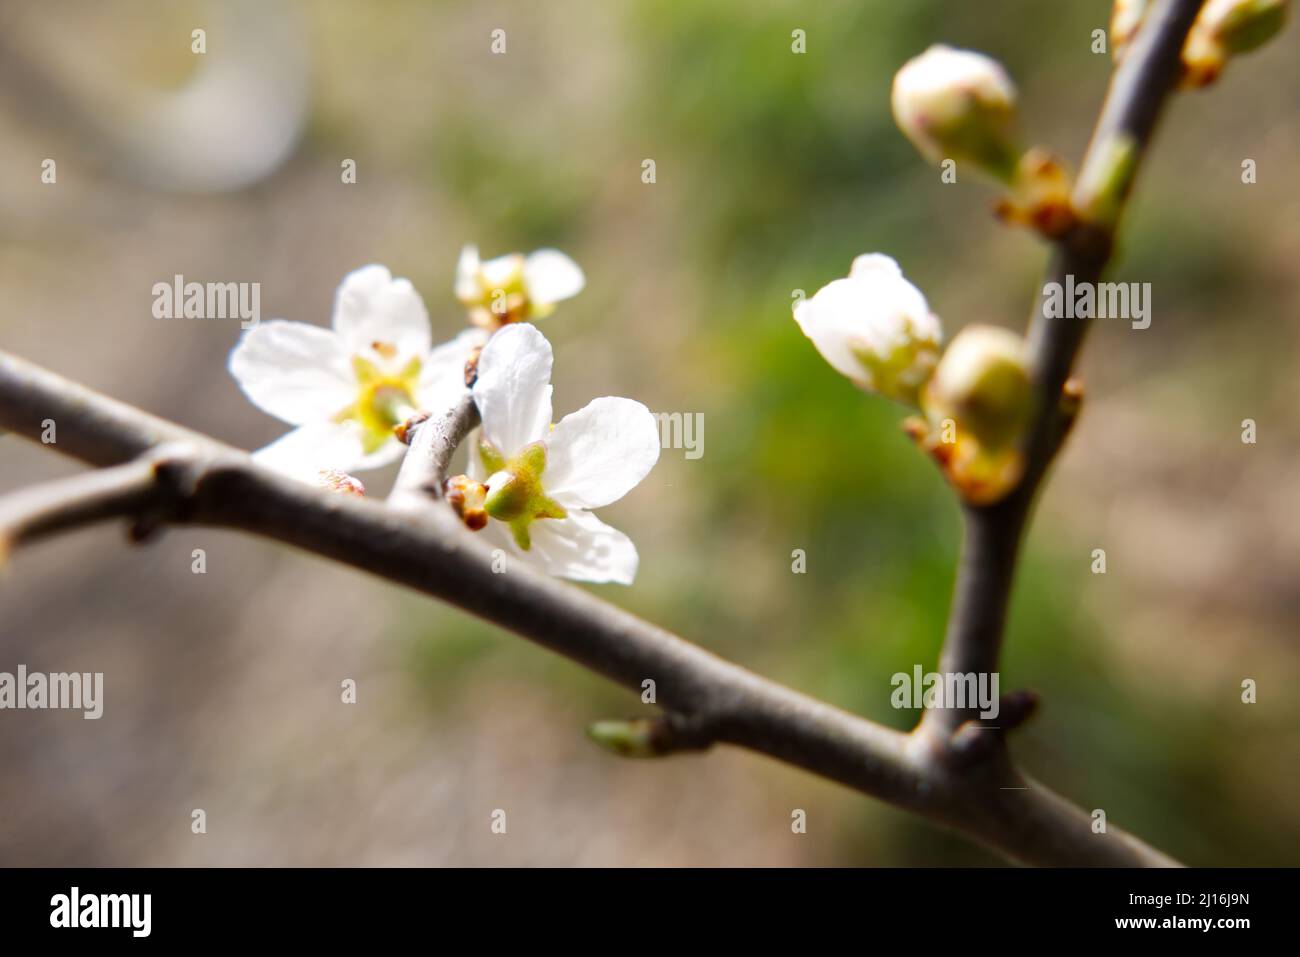 Close-up of the back of Blackthorn blossom (Prunus spinosa), showing the sepals. Stock Photo